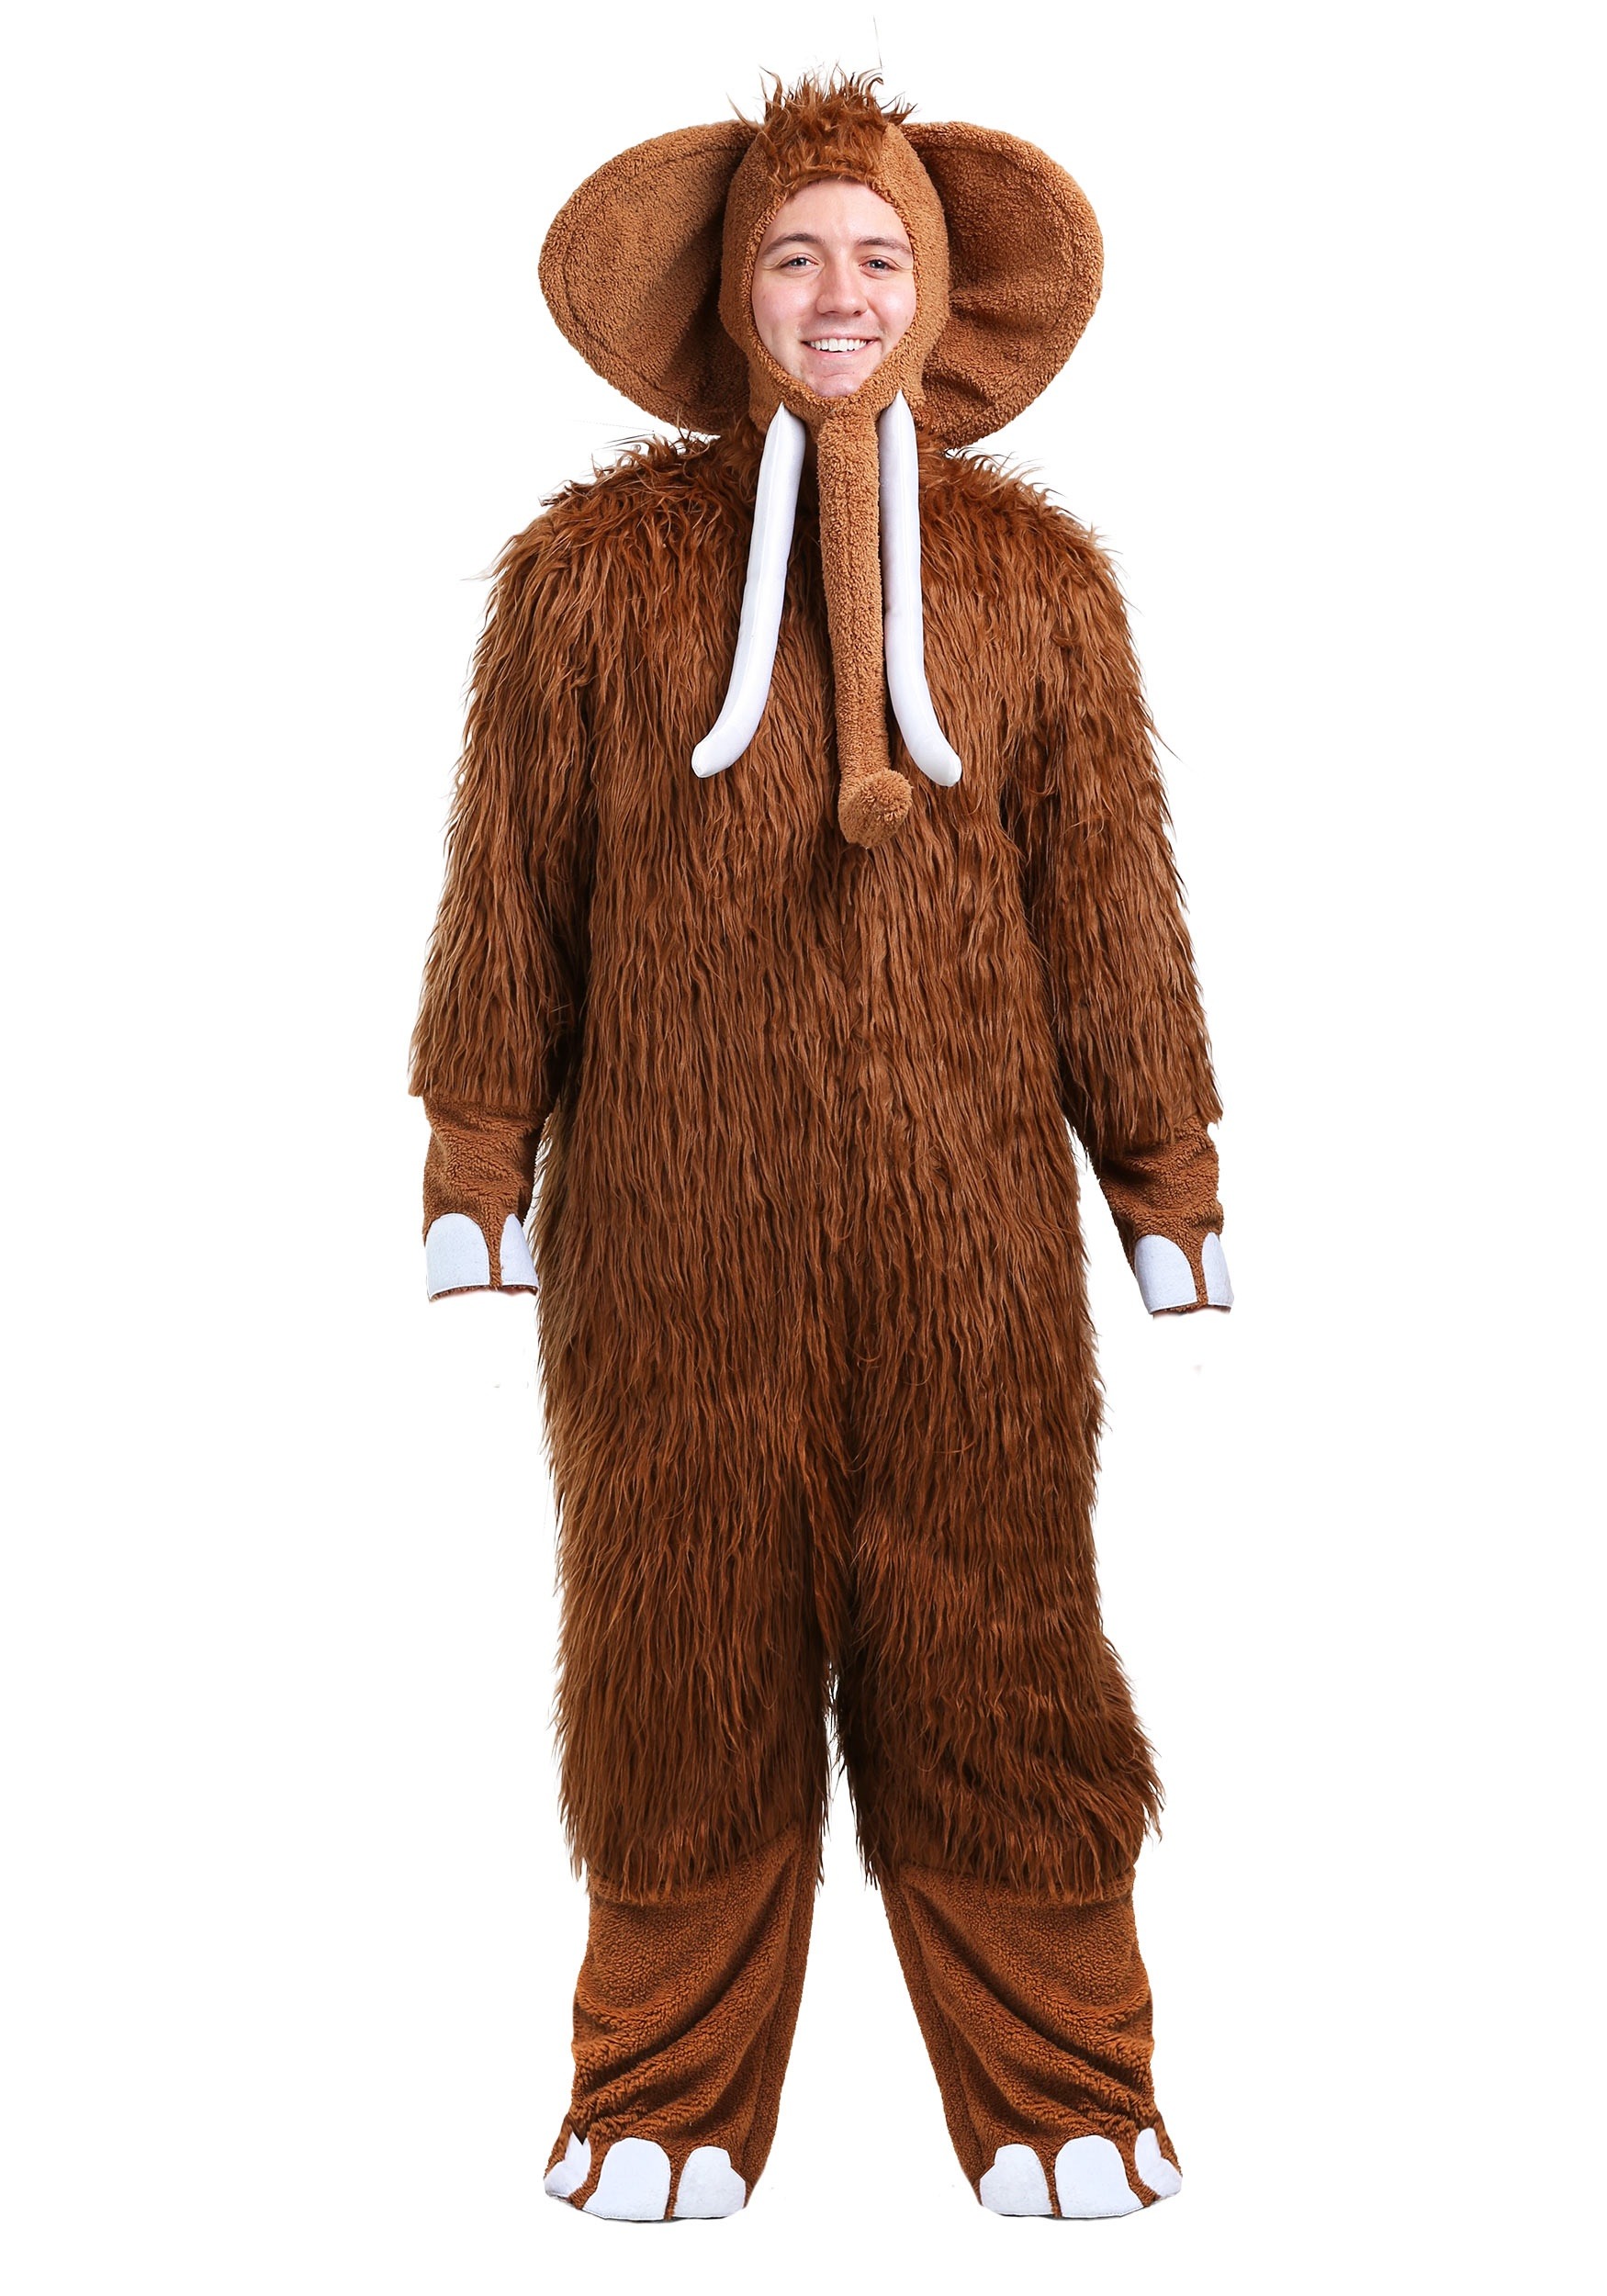 Image of Woolly Mammoth Costume for Men ID FUN2700AD-XL